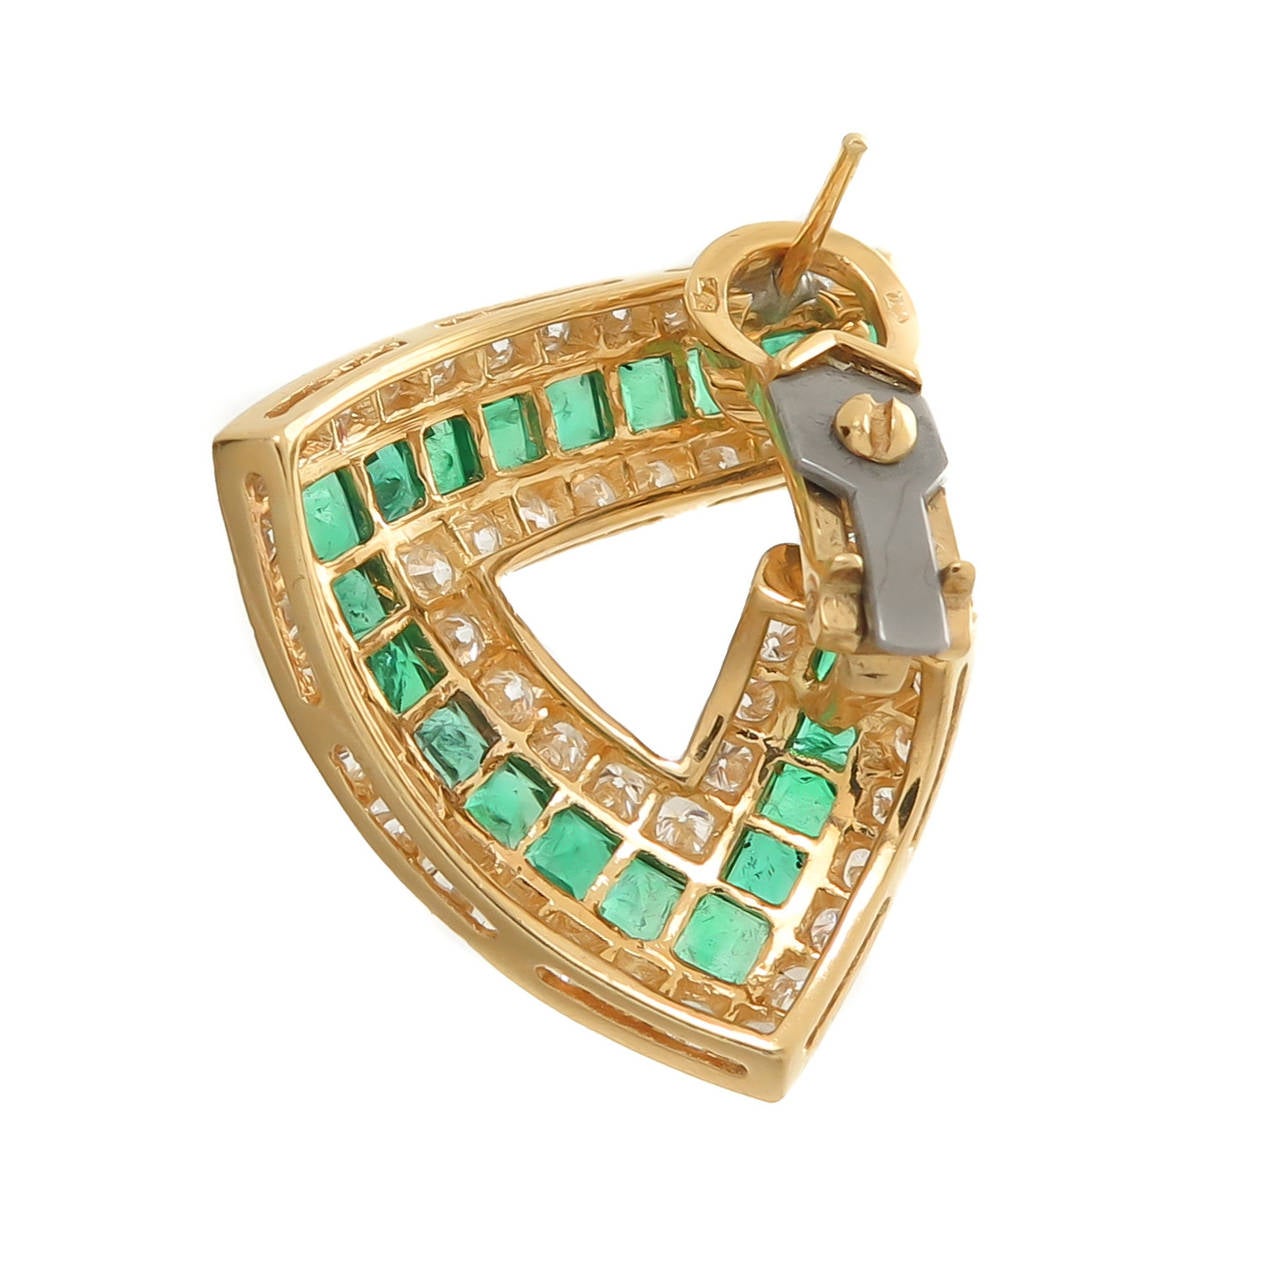 Circa 2000 18K Yellow Gold Earrings, set with 3 Carats of very Fine White Diamonds, F-G in Color and VVS in Clarity. Further Channel set with Square cut Emeralds that are of very Fine intense Color, possibly Colombian and totaling approximately 4